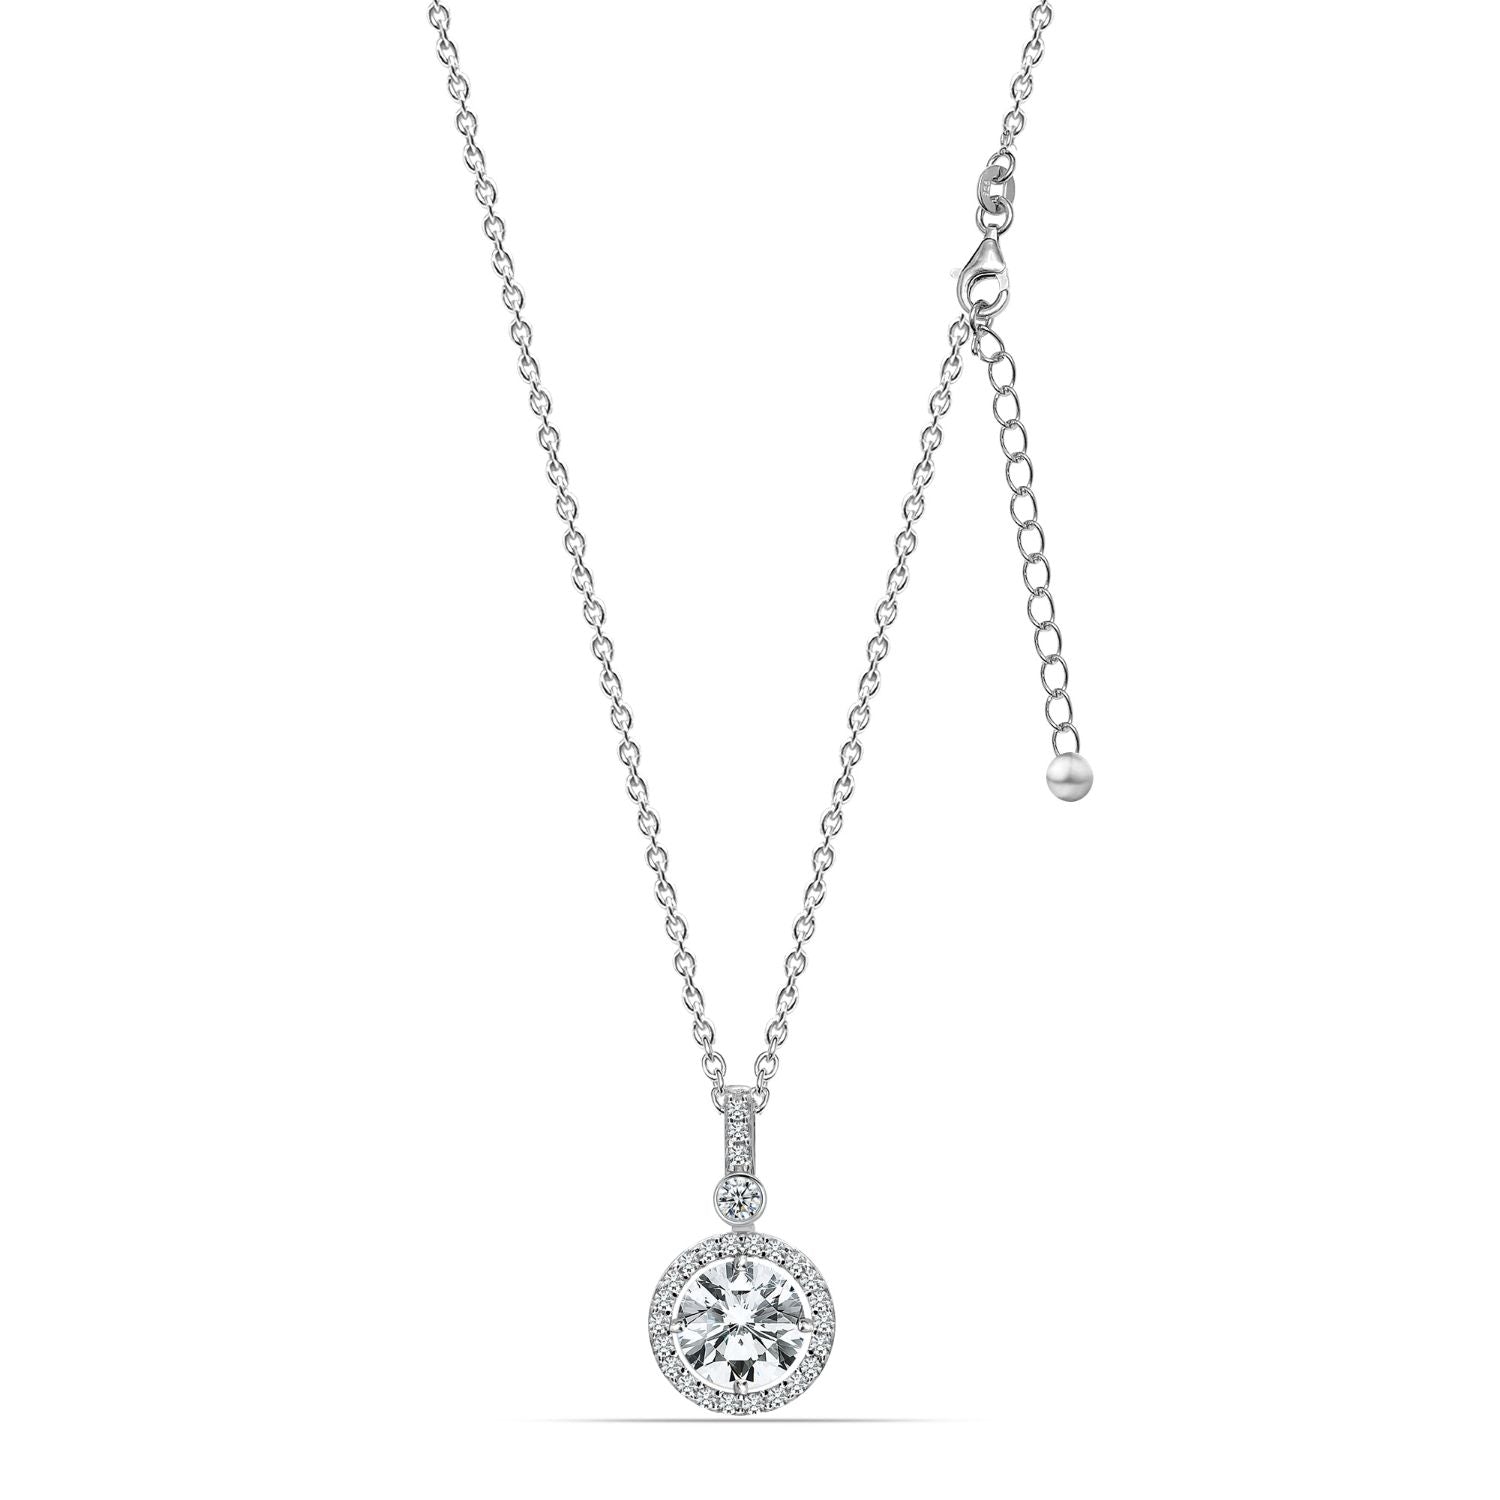 925 Sterling Silver CZ Drizzle Round Drop Pendant with Cable Chain Necklace for Women Teen